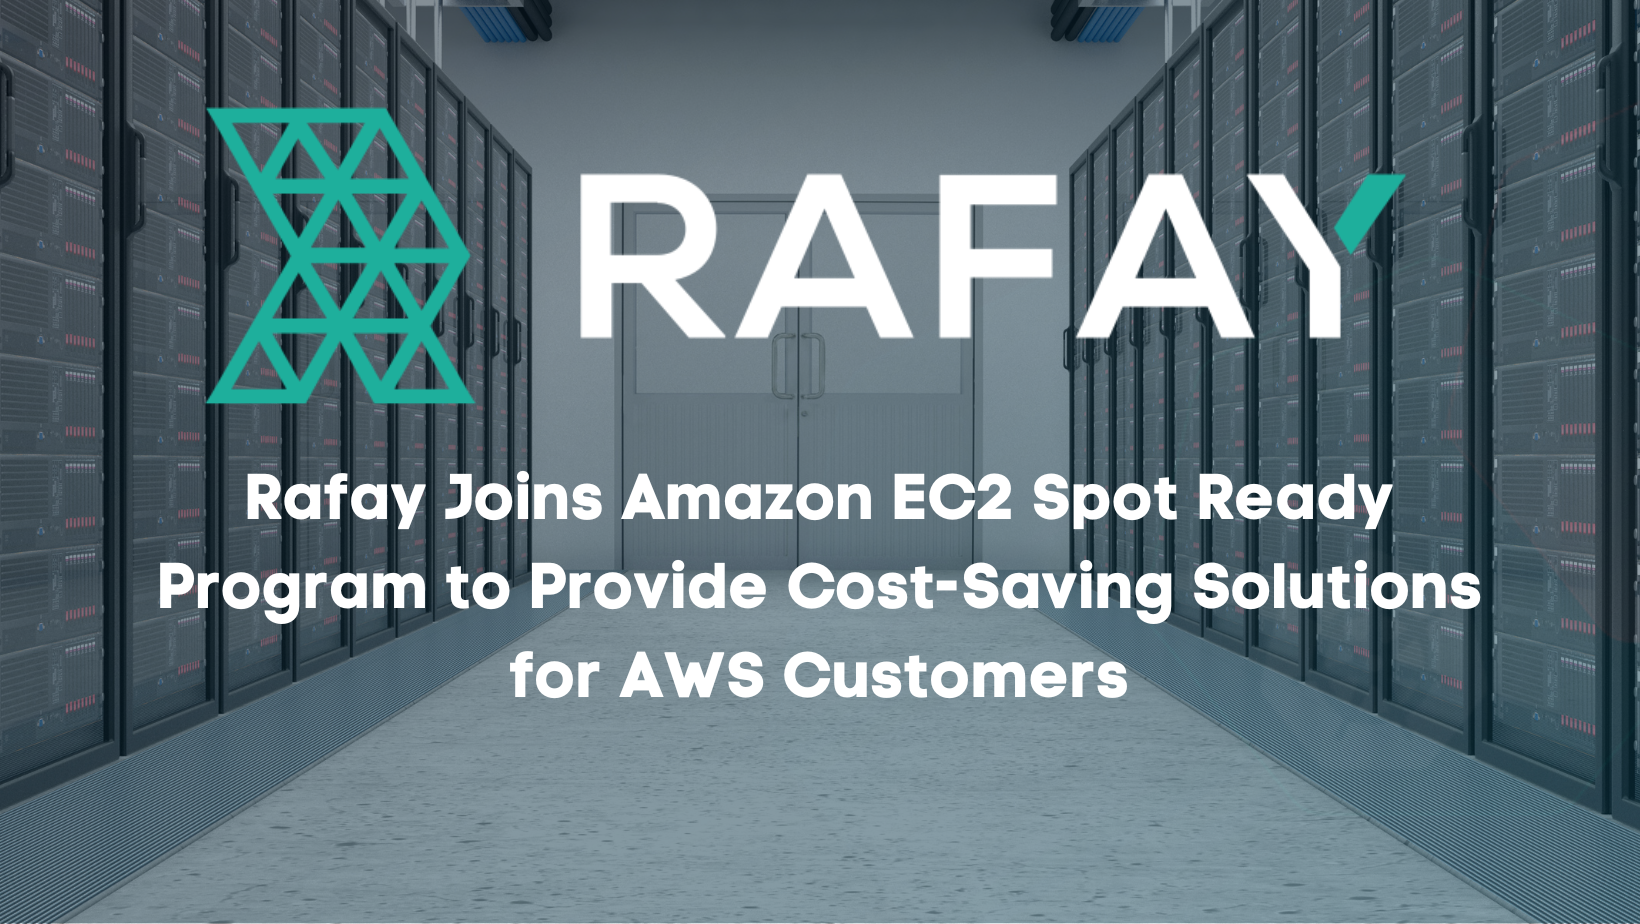 Image for Rafay Joins Amazon EC2 Spot Ready Program to Provide Cost-Saving Solutions for AWS Customers